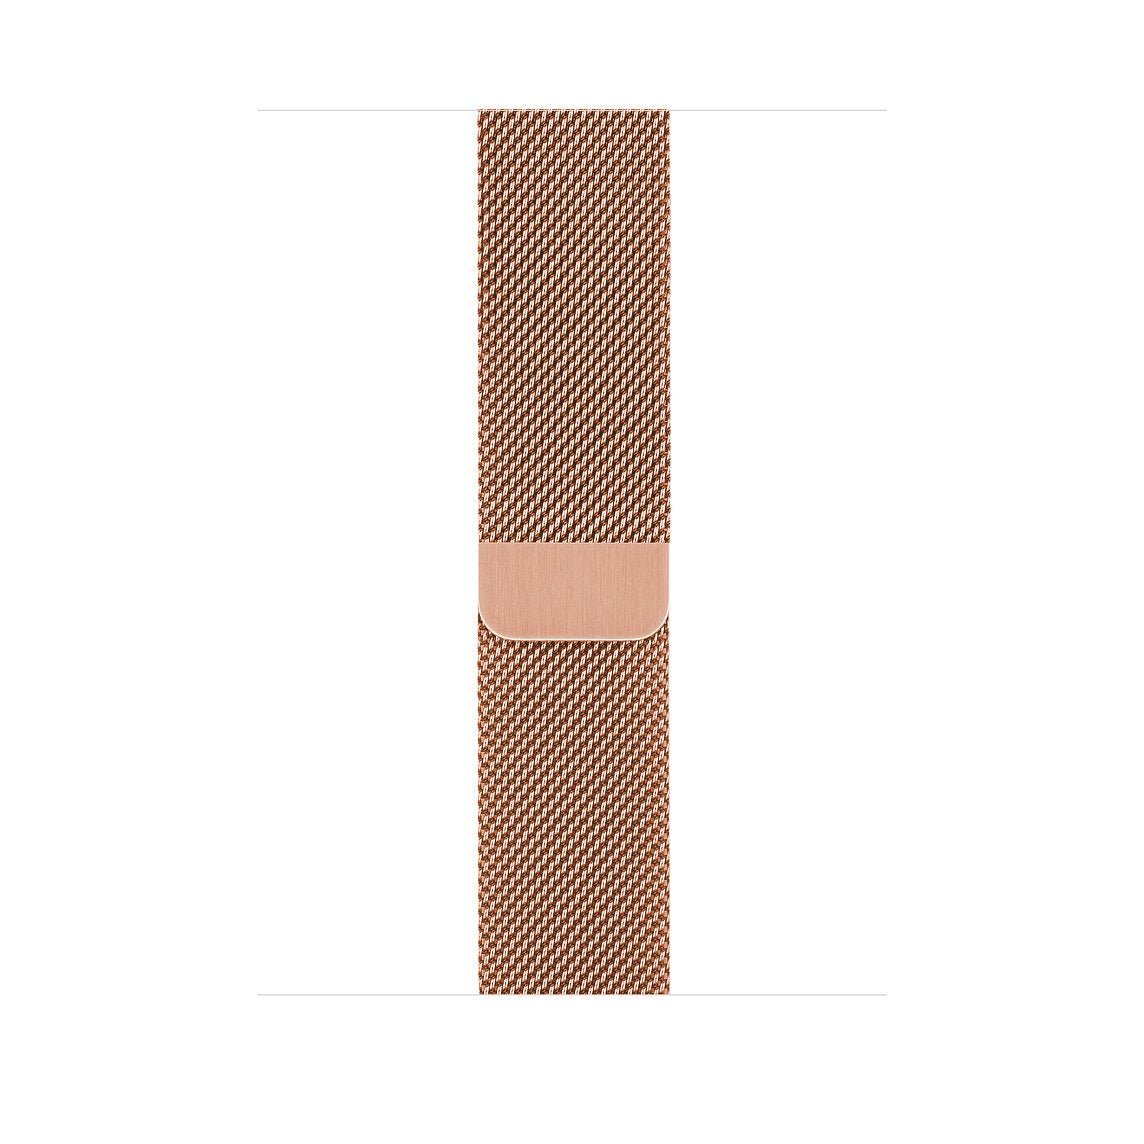 Rose Gold Apple Watch Strap Milanese Loop Replacement Milanese Loop   Accessories Gifts UK